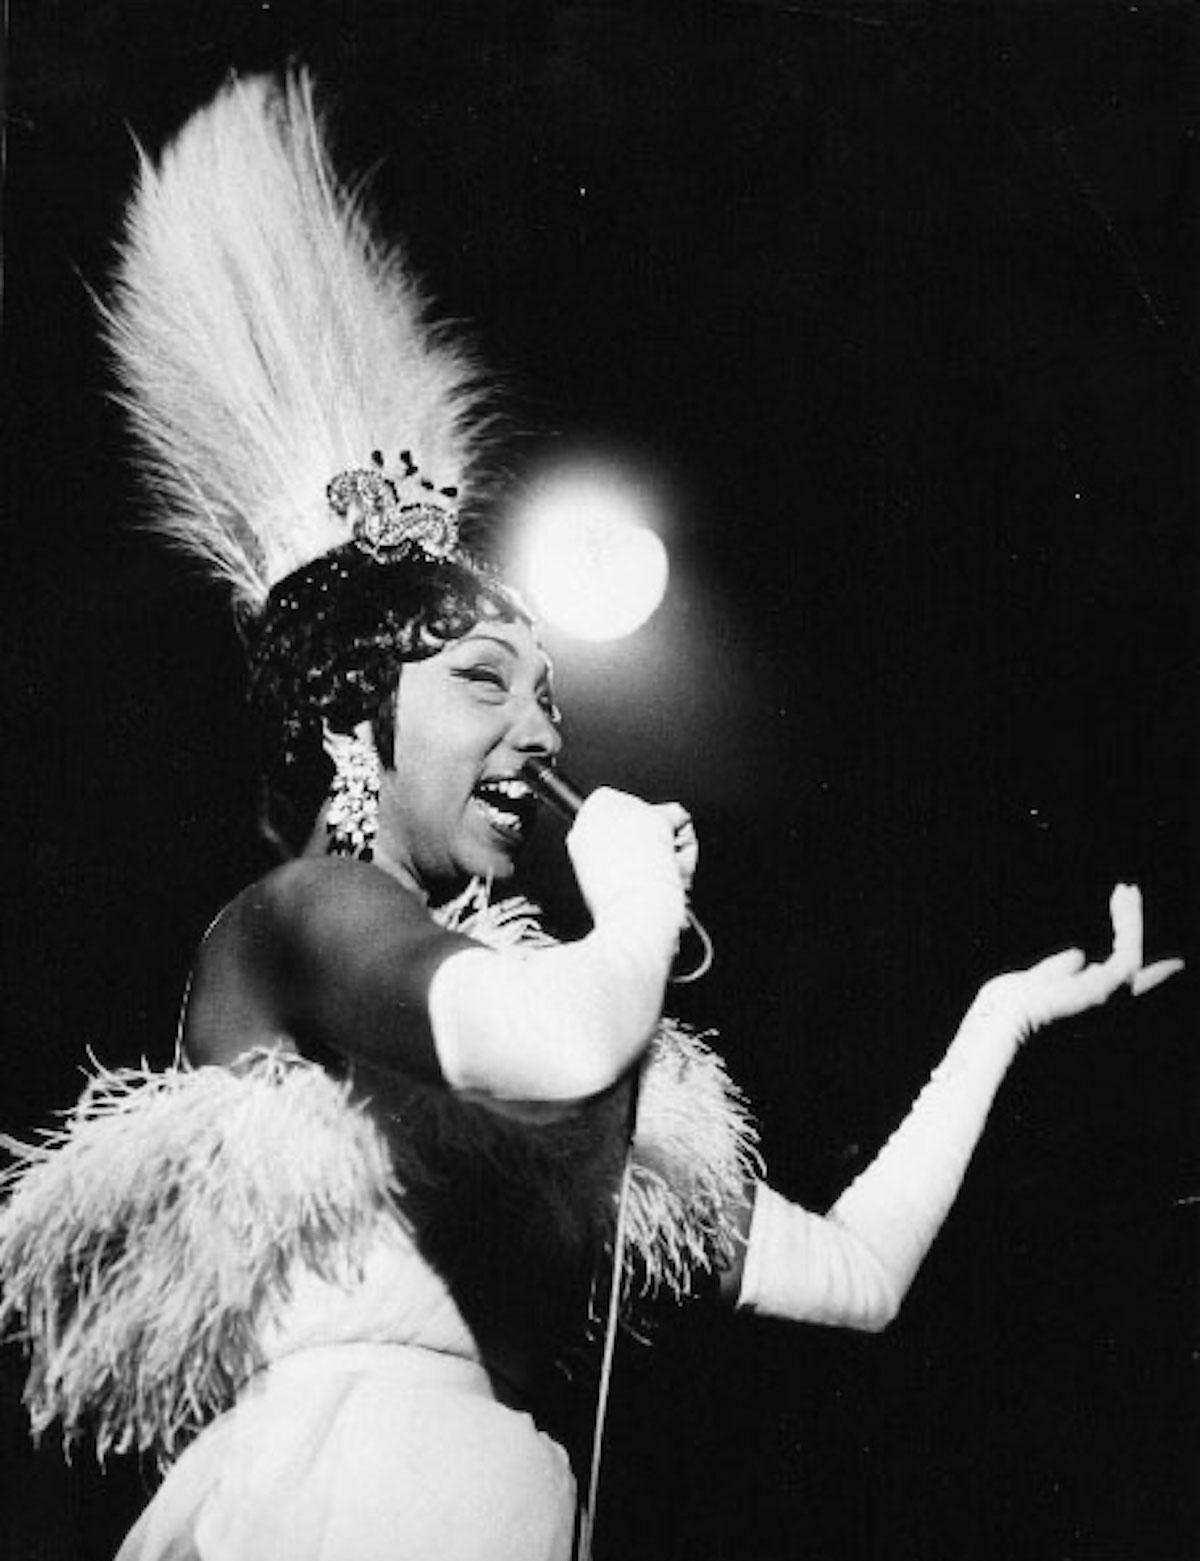 Unknown Black and White Photograph - Vintage Photo of Josephine Baker While Singing - Late 1960s